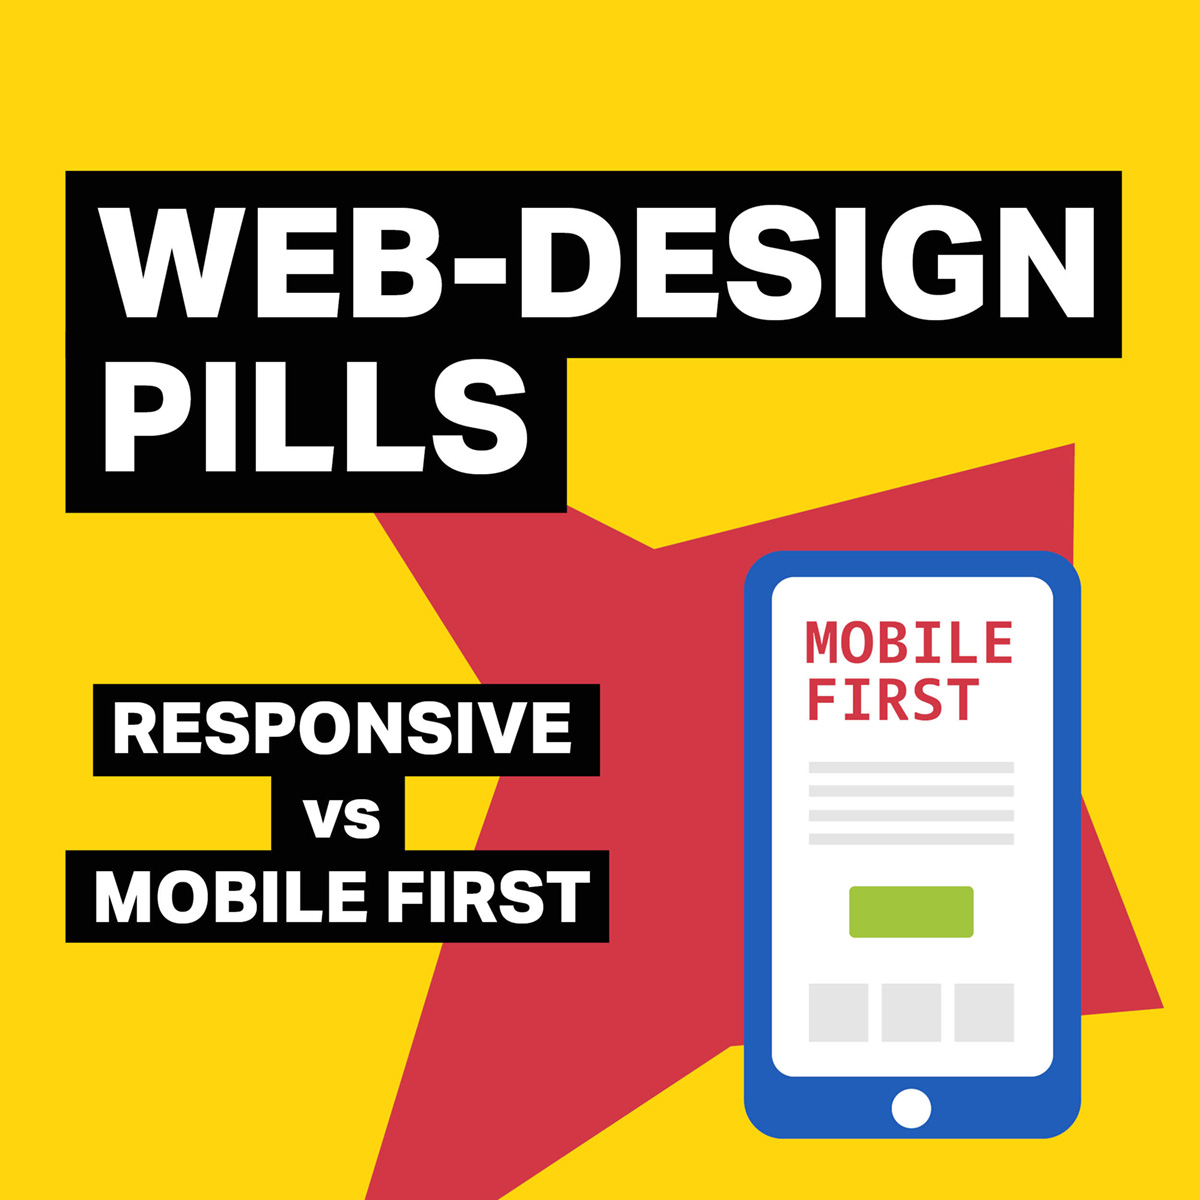 Responsive vs mobile first